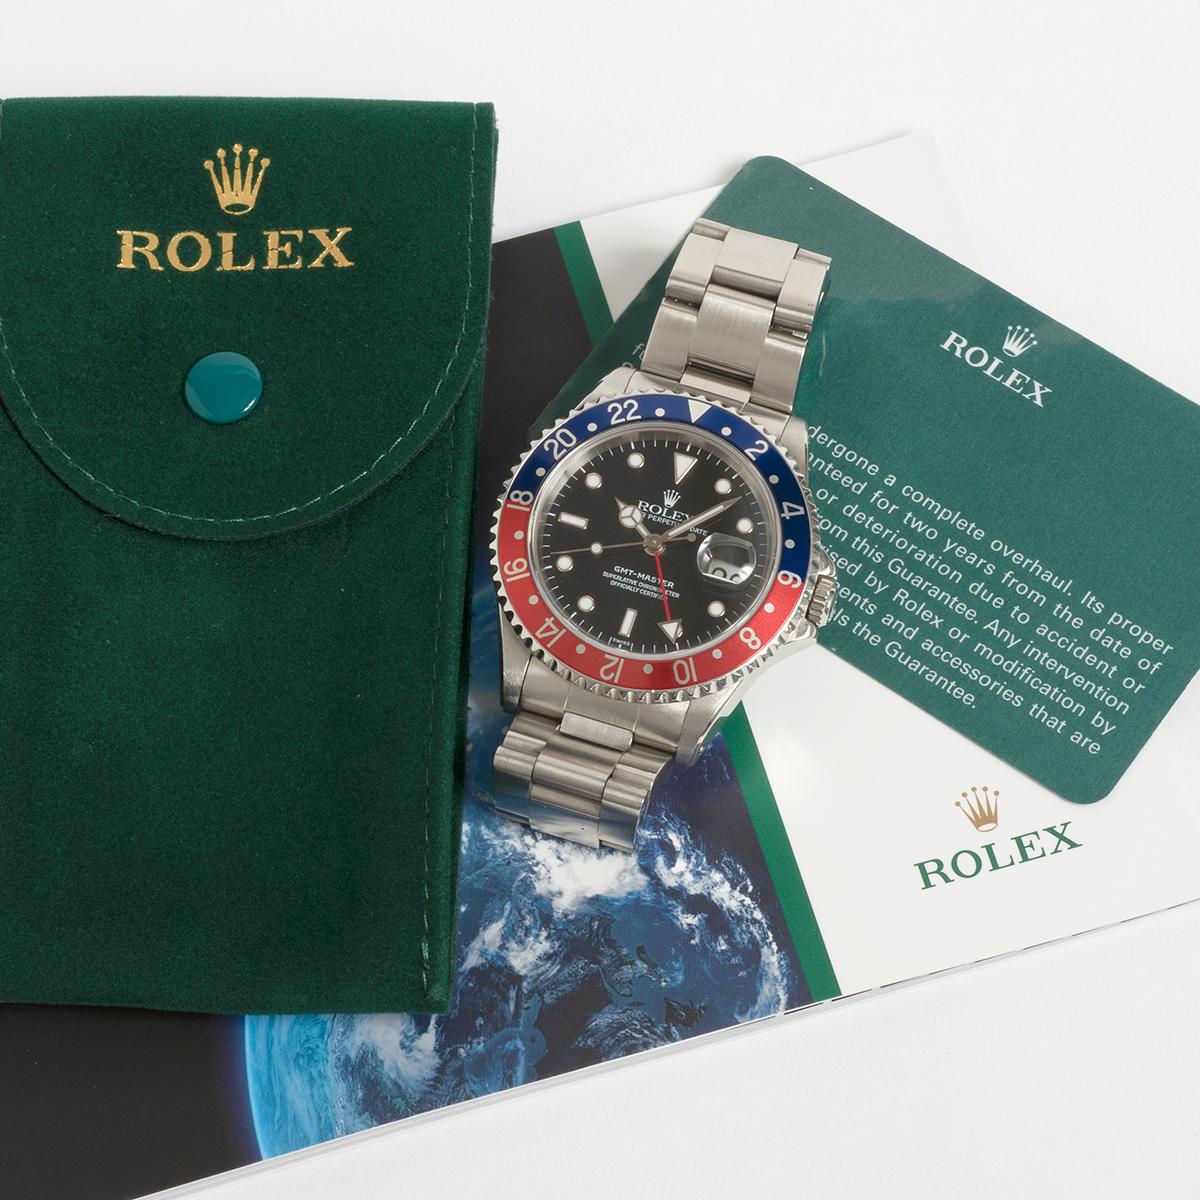 Our classic and neo vintage transitional Rolex GMT Master, reference 16700, with 40mm stainless steel case and stainless steel Oyster bracelet with flip lock clasp, is presented in excellent condition, with a little stretch got the bracelet, to be